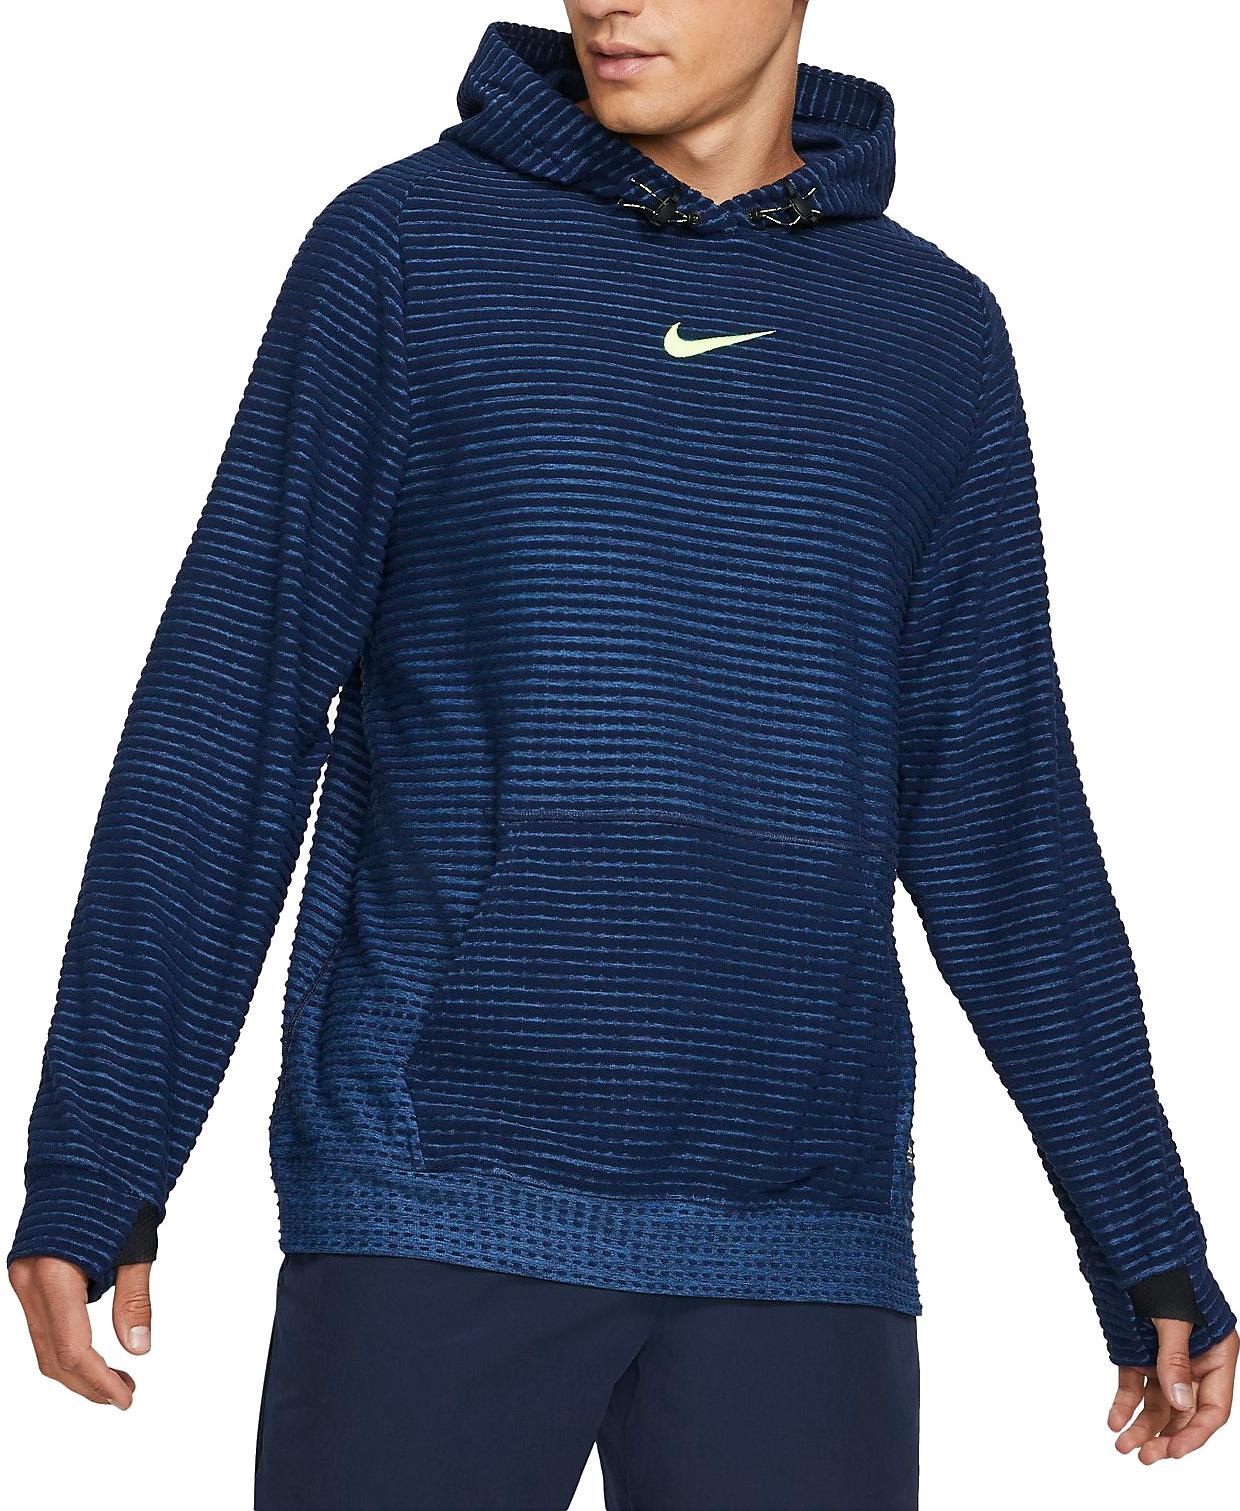 https://i1.t4s.cz/products/dd1707-451/nike-pro-therma-fit-adv-men-s-fleece-pullover-hoodie-369202-dd1707-451.jpg